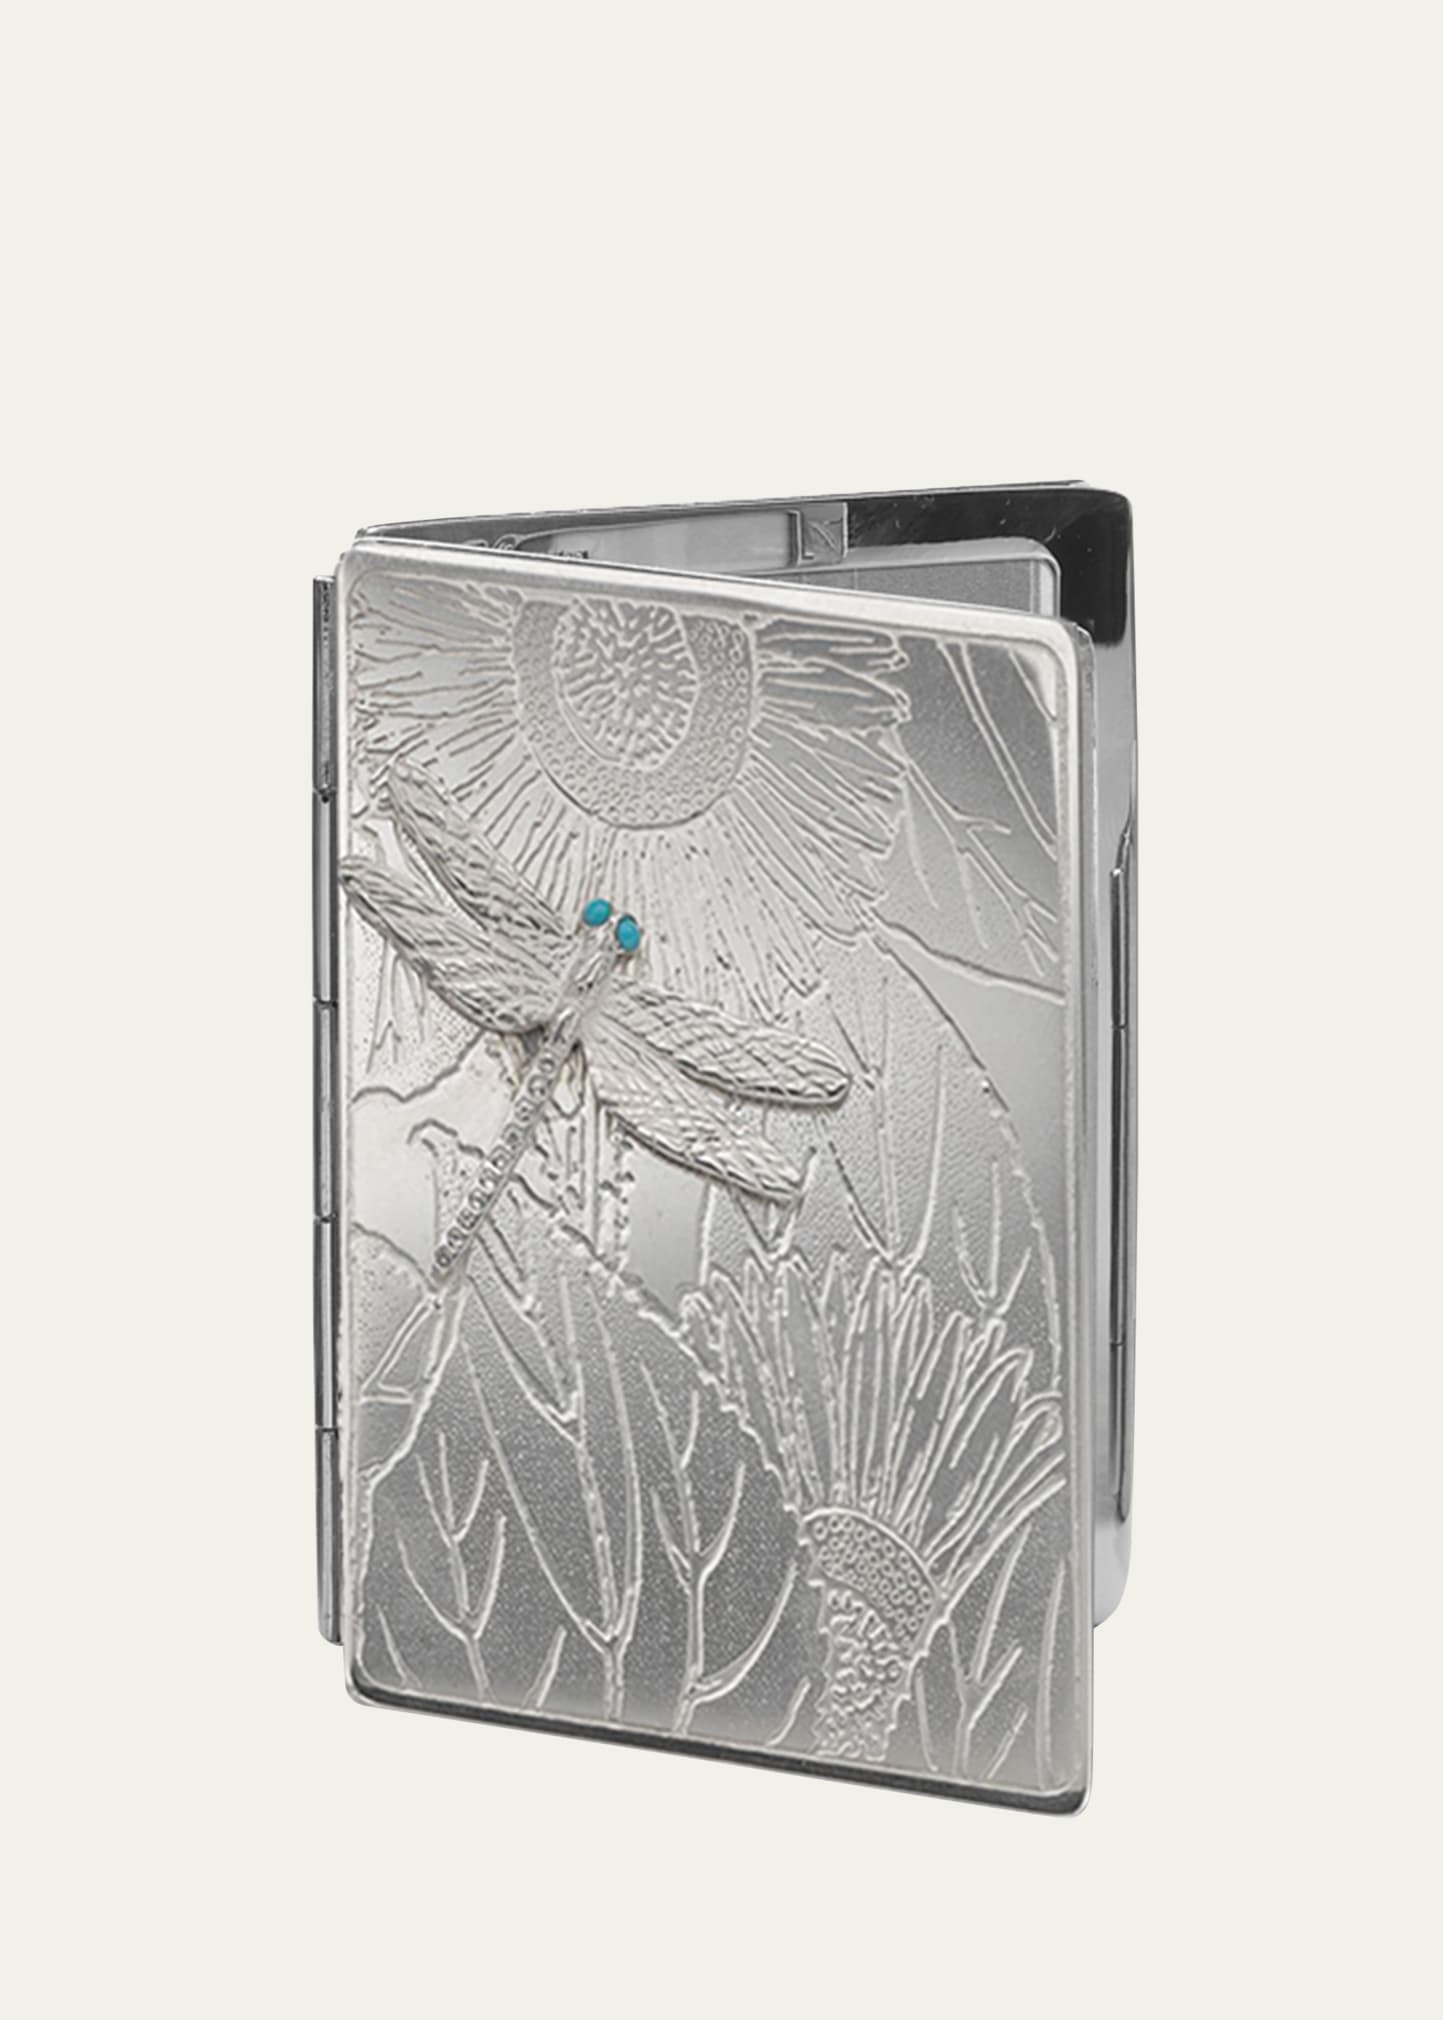 Large Photo Case With Dragon Fly